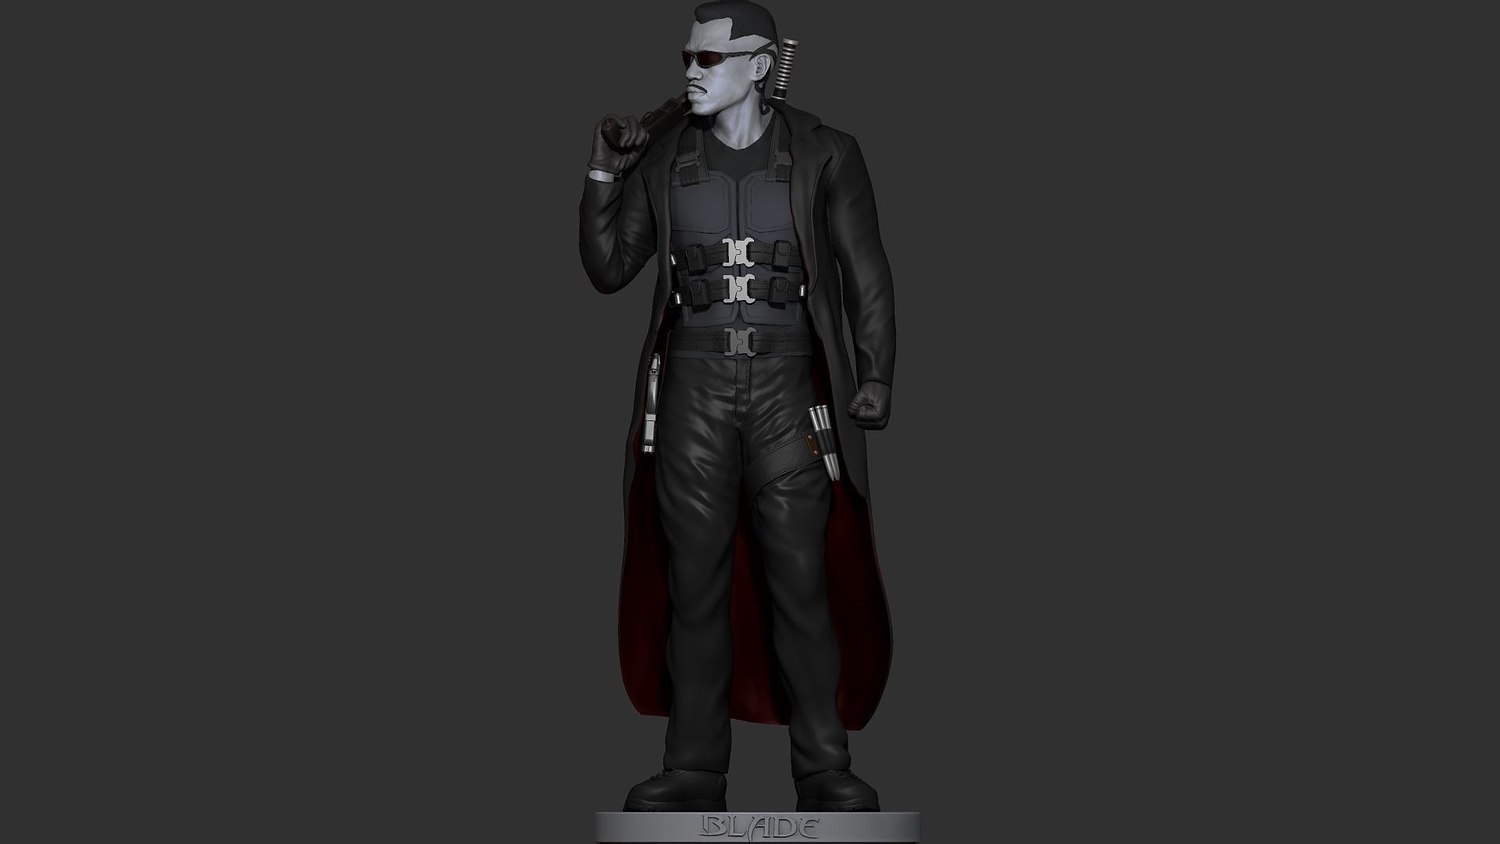 Blade From Marvel